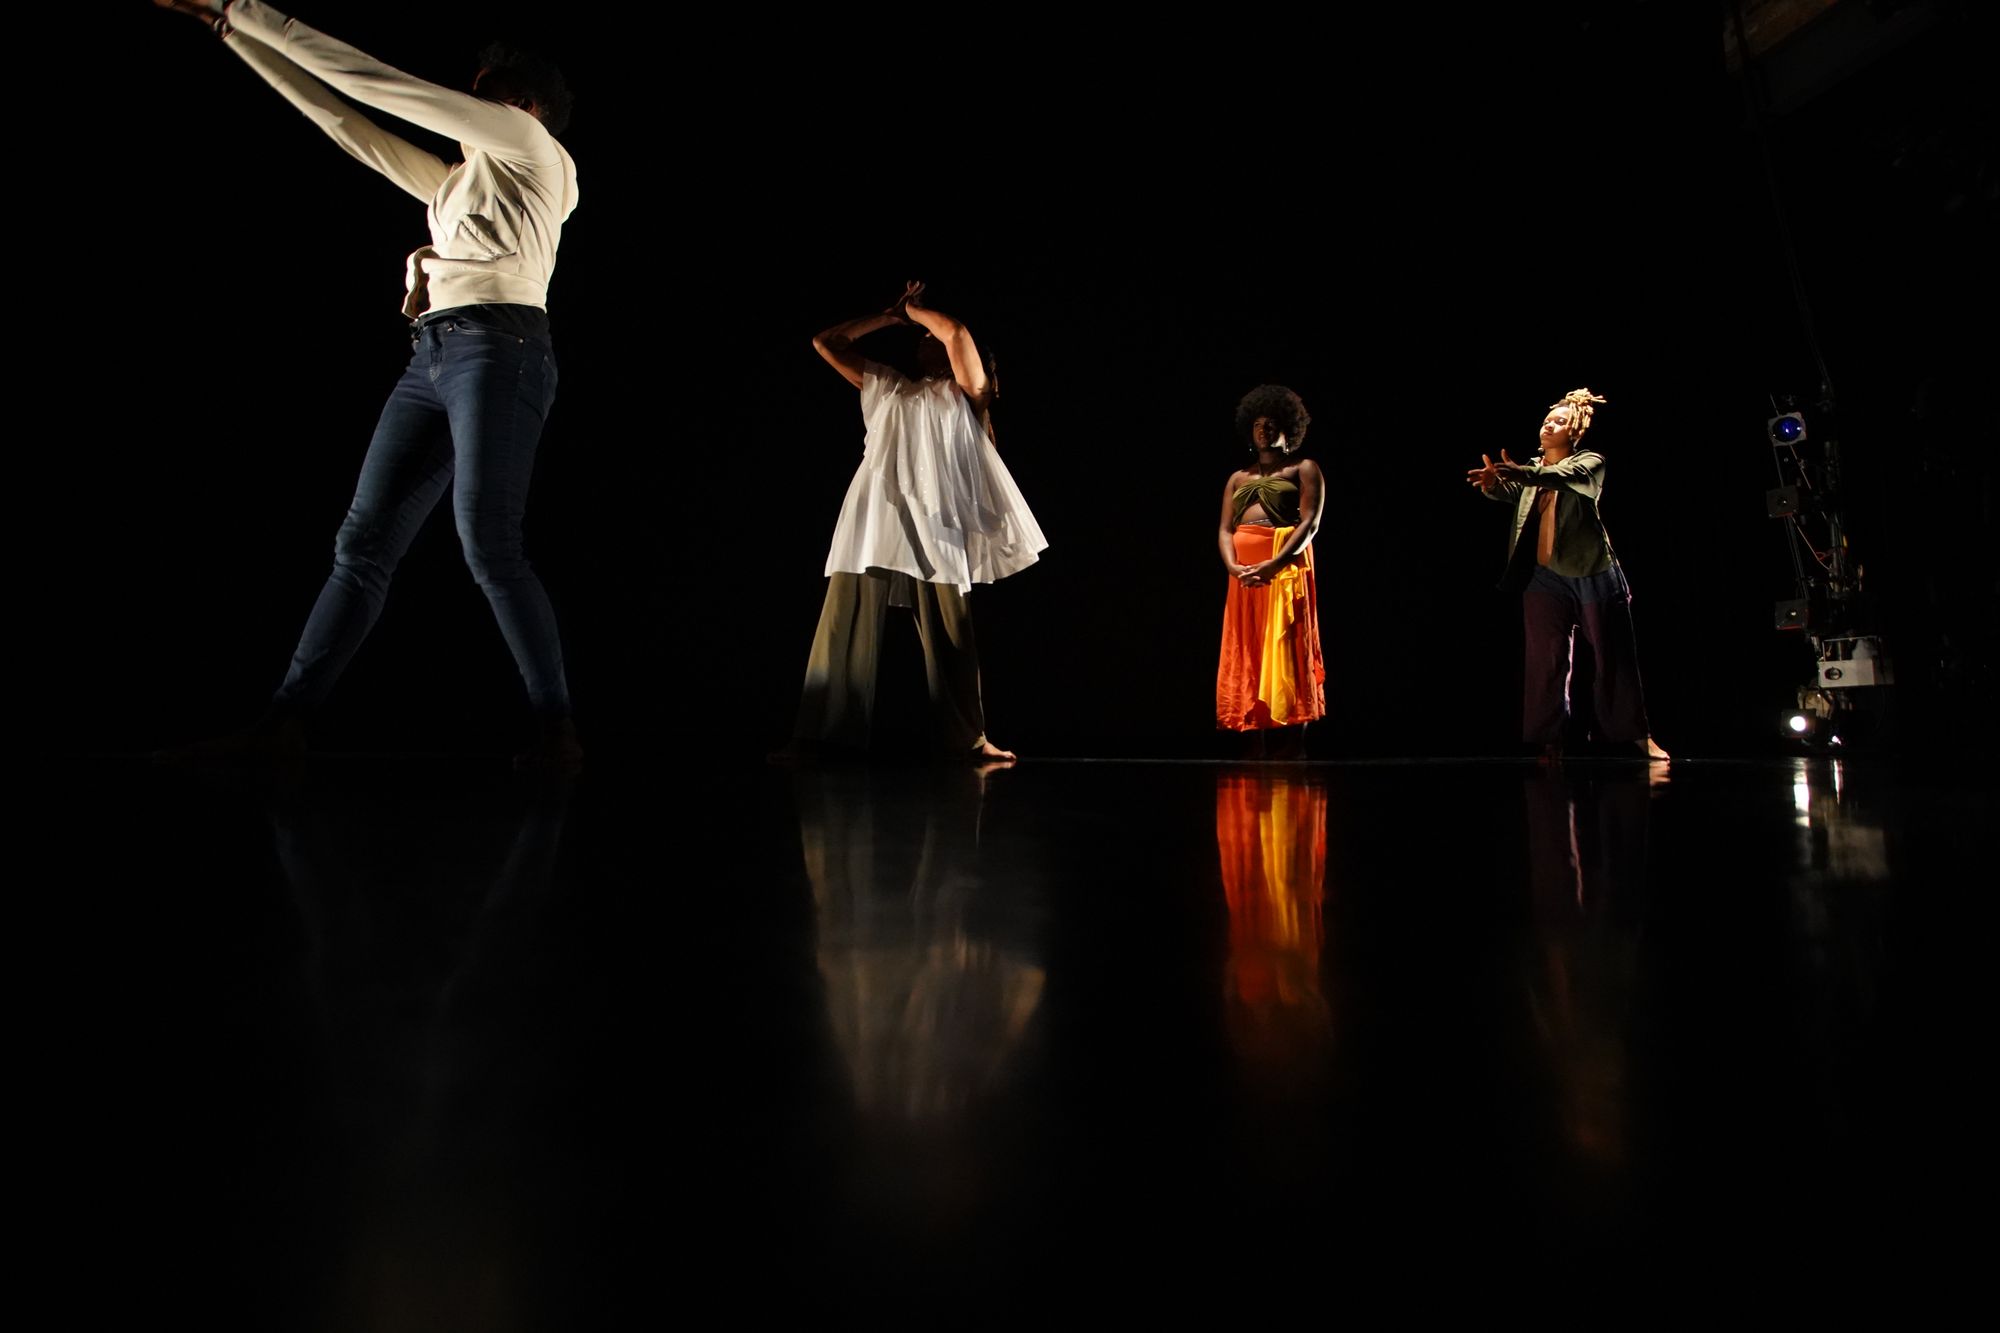 MK Abadoo, in blue jeans and a white jacket, has their right leg stepped forward with both arms extended up and in front. Enveloped in darkness, light beams from dancers Julinda Lewis, Christine Wyatt and Sehay Durant, as they emulate and witness MK’s movement.